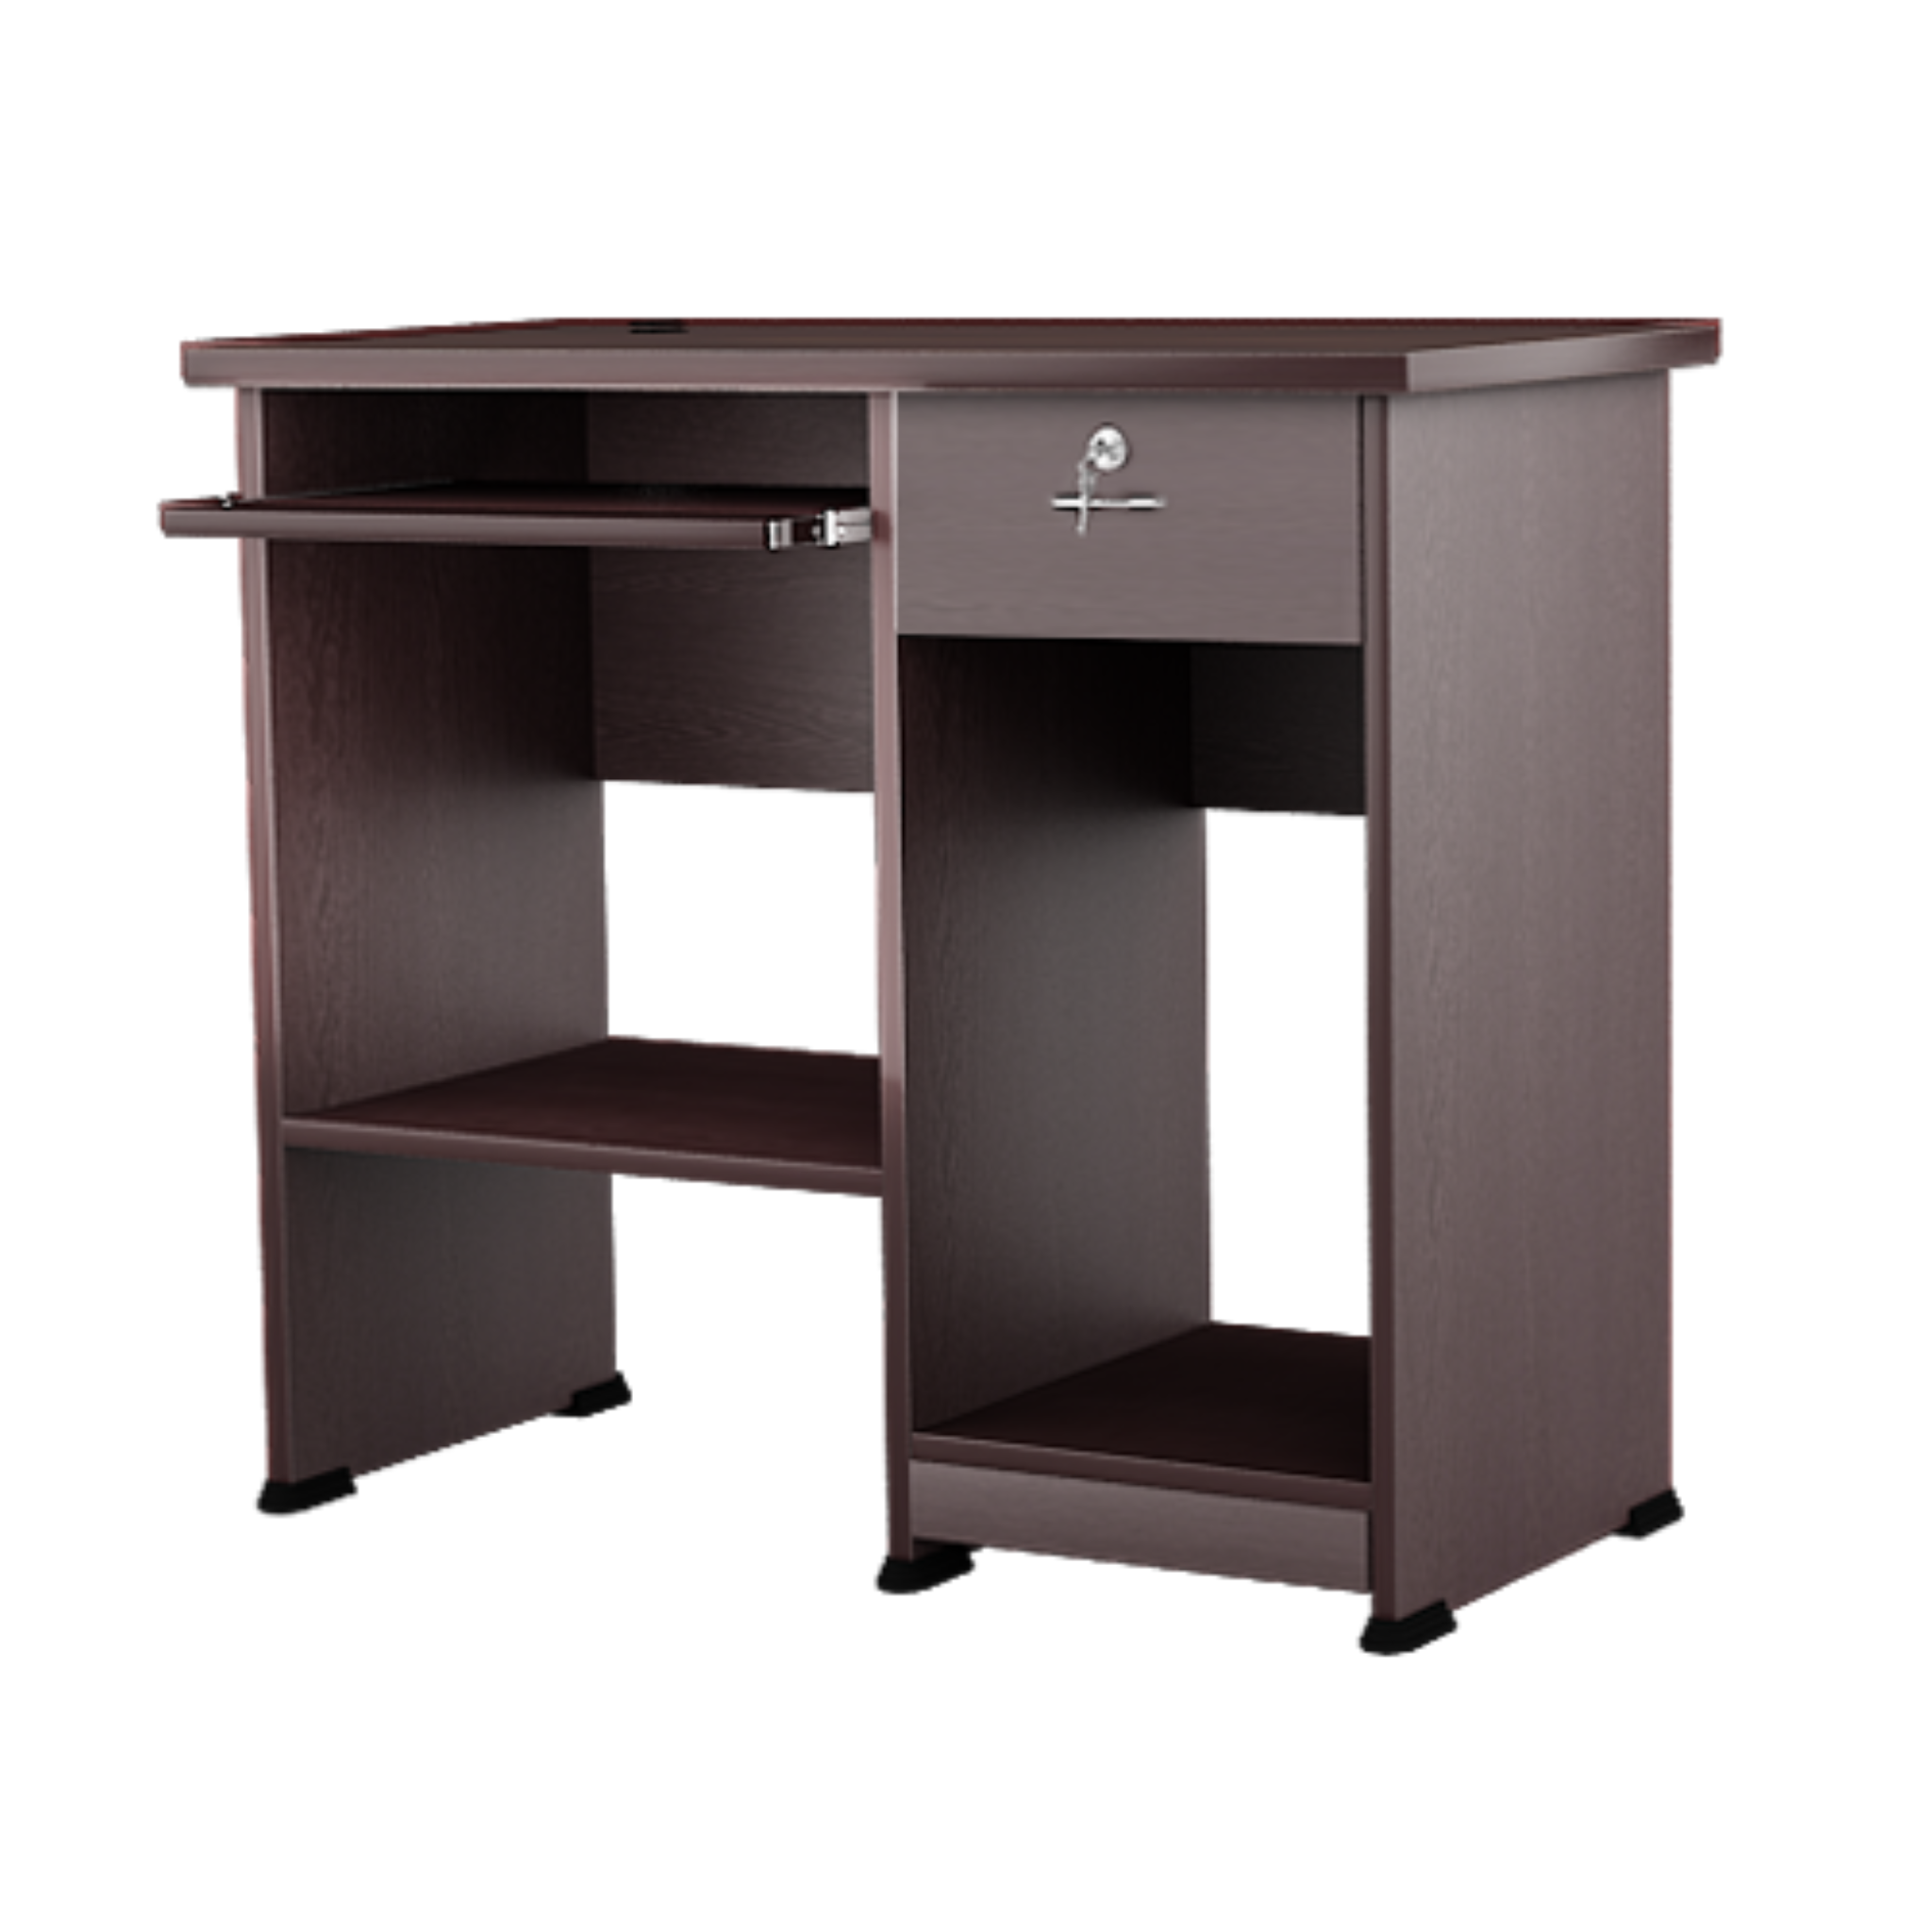 Stylish and Ergonomic Computer Table with Cabinet Space For Your Home Office